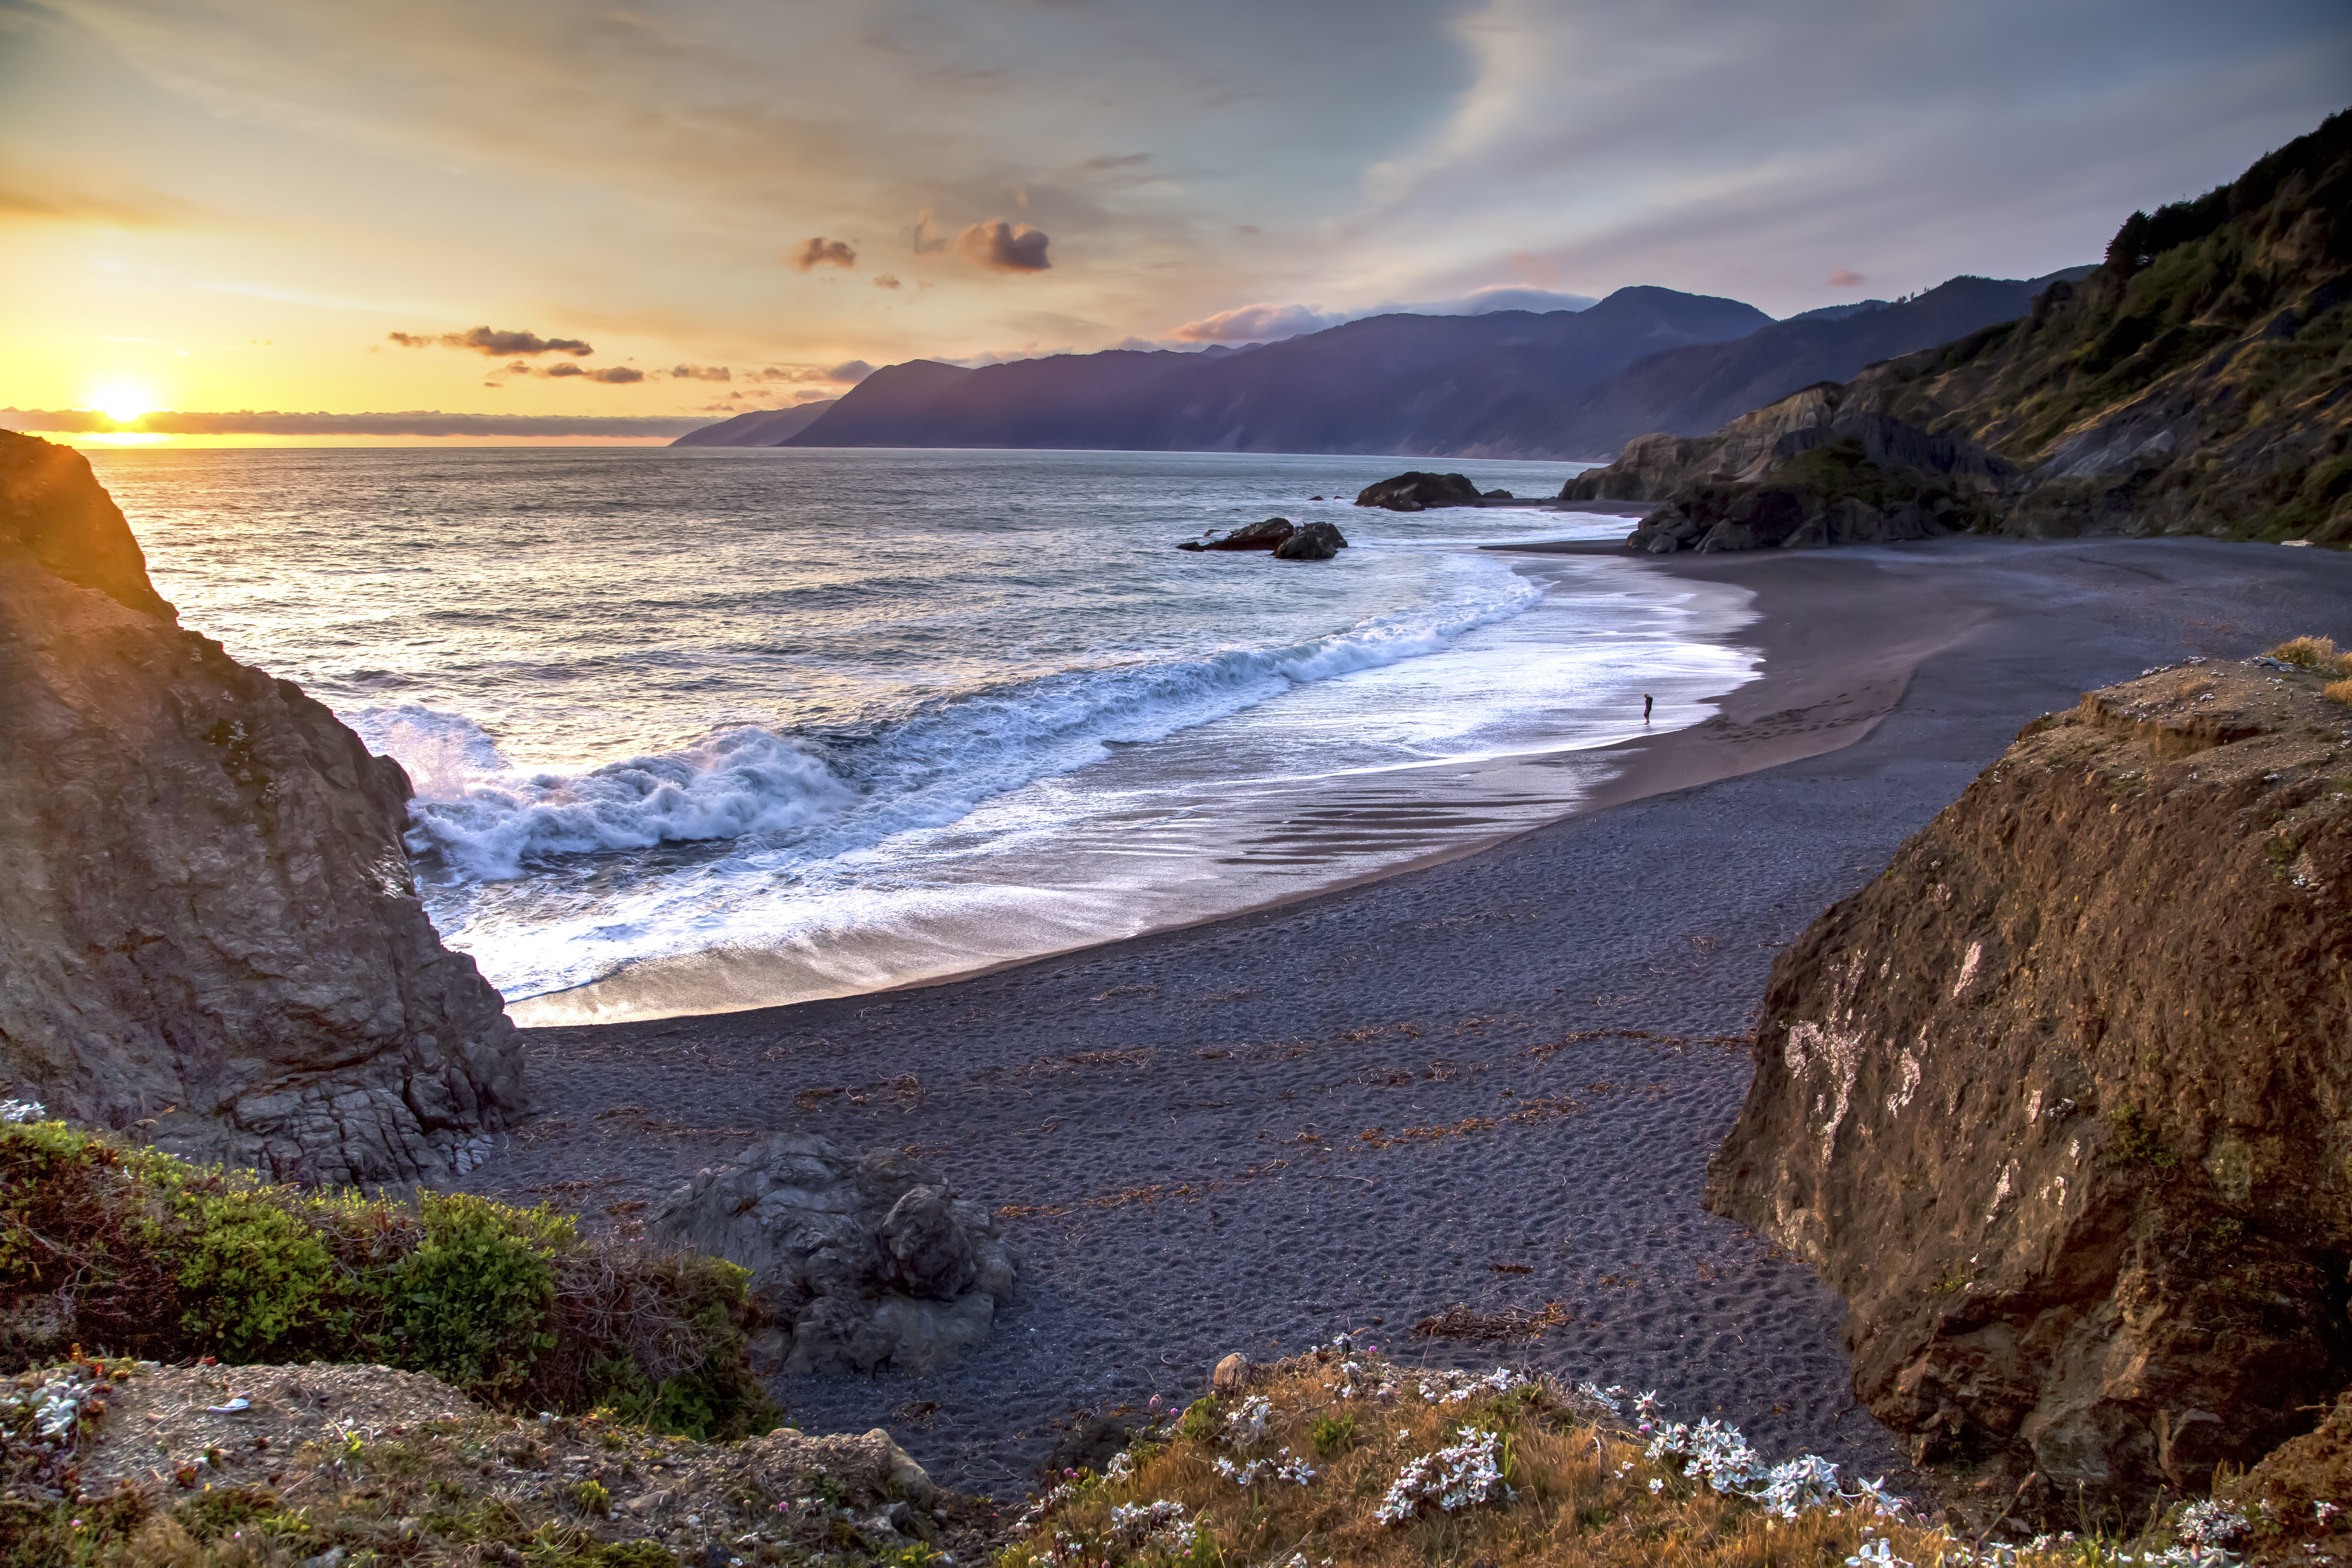 Shallow ocean waves backed by an orange setting sun in the distance wash up onto a curved sandy beach surrounded by large rocks which extend into mountains in the distance.